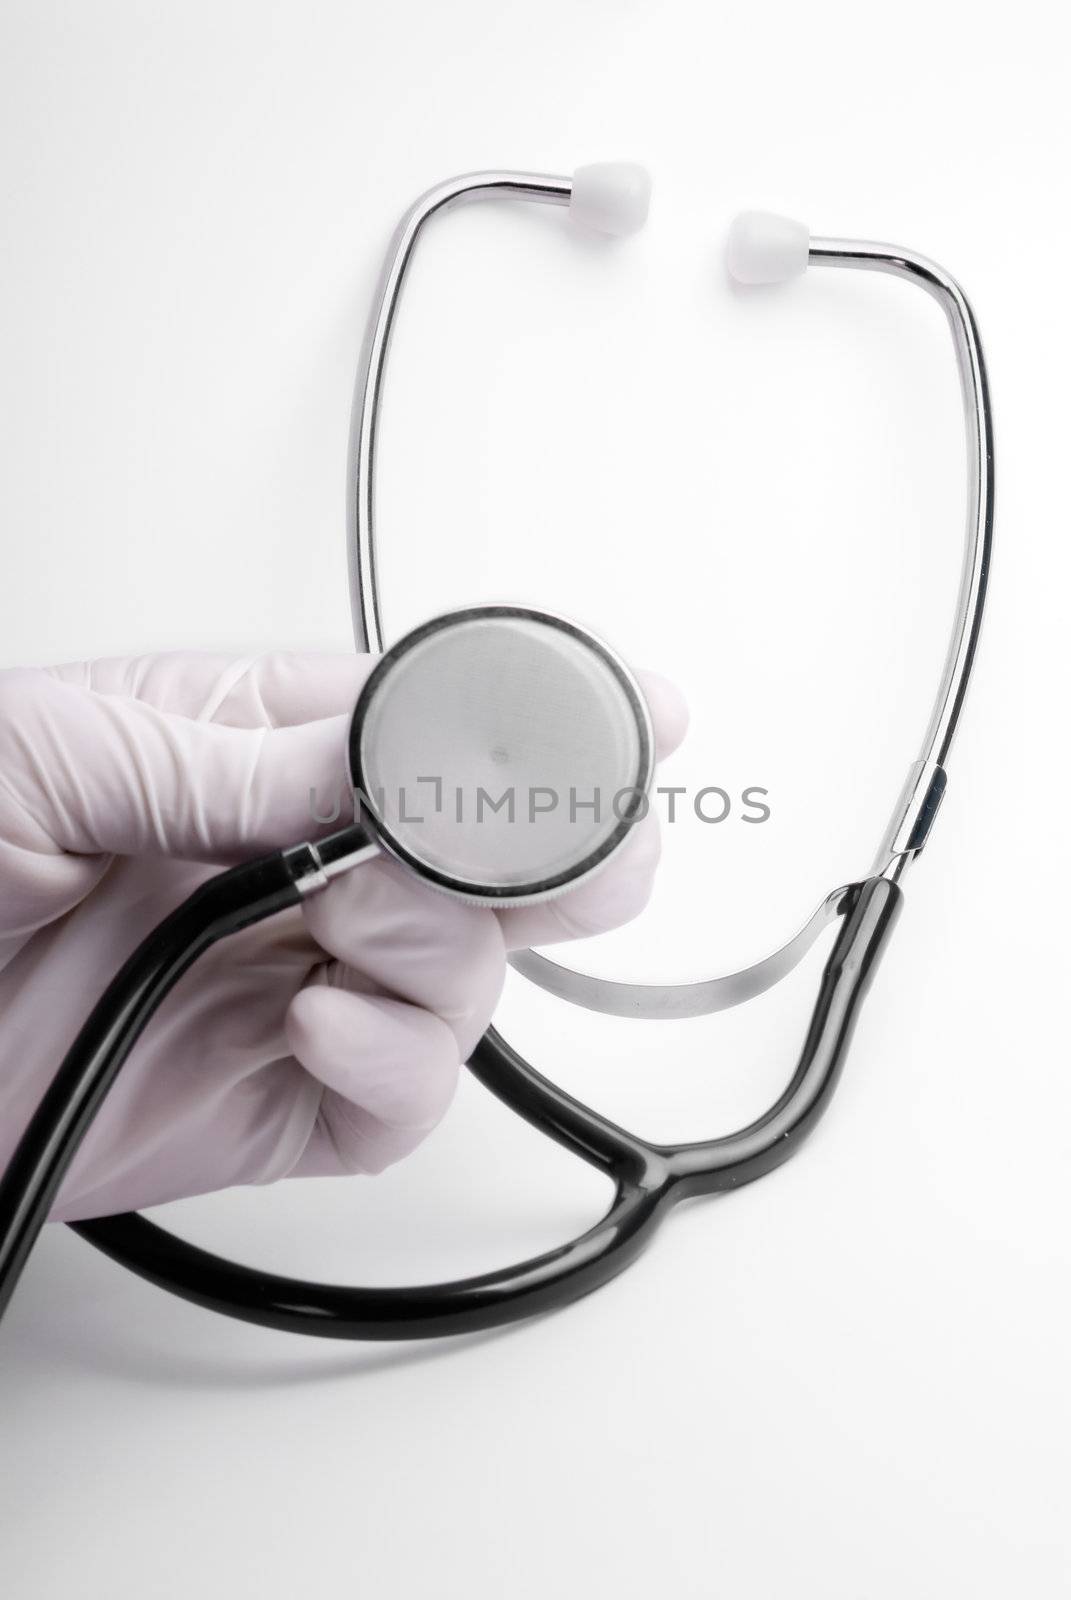 Stethoscope with medic hand by dgmata